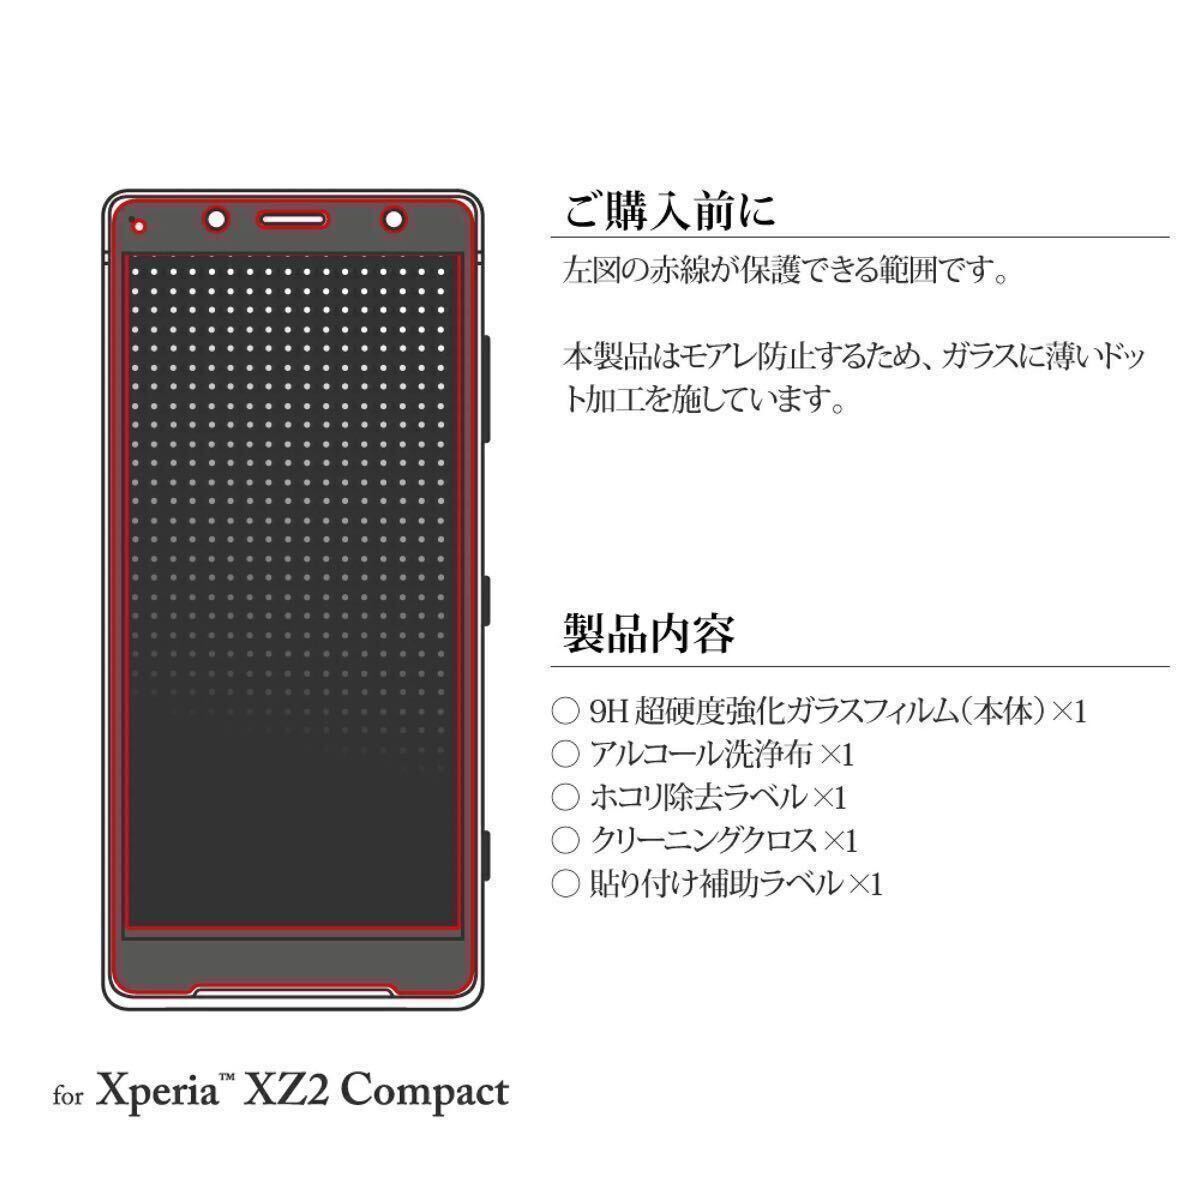 XperiaXZ2 Compact ガラスフィルム ピンクフレーム 全画面保護/高光沢/0.20mm LP-XPXC2FGFPK SO-05K fの画像5